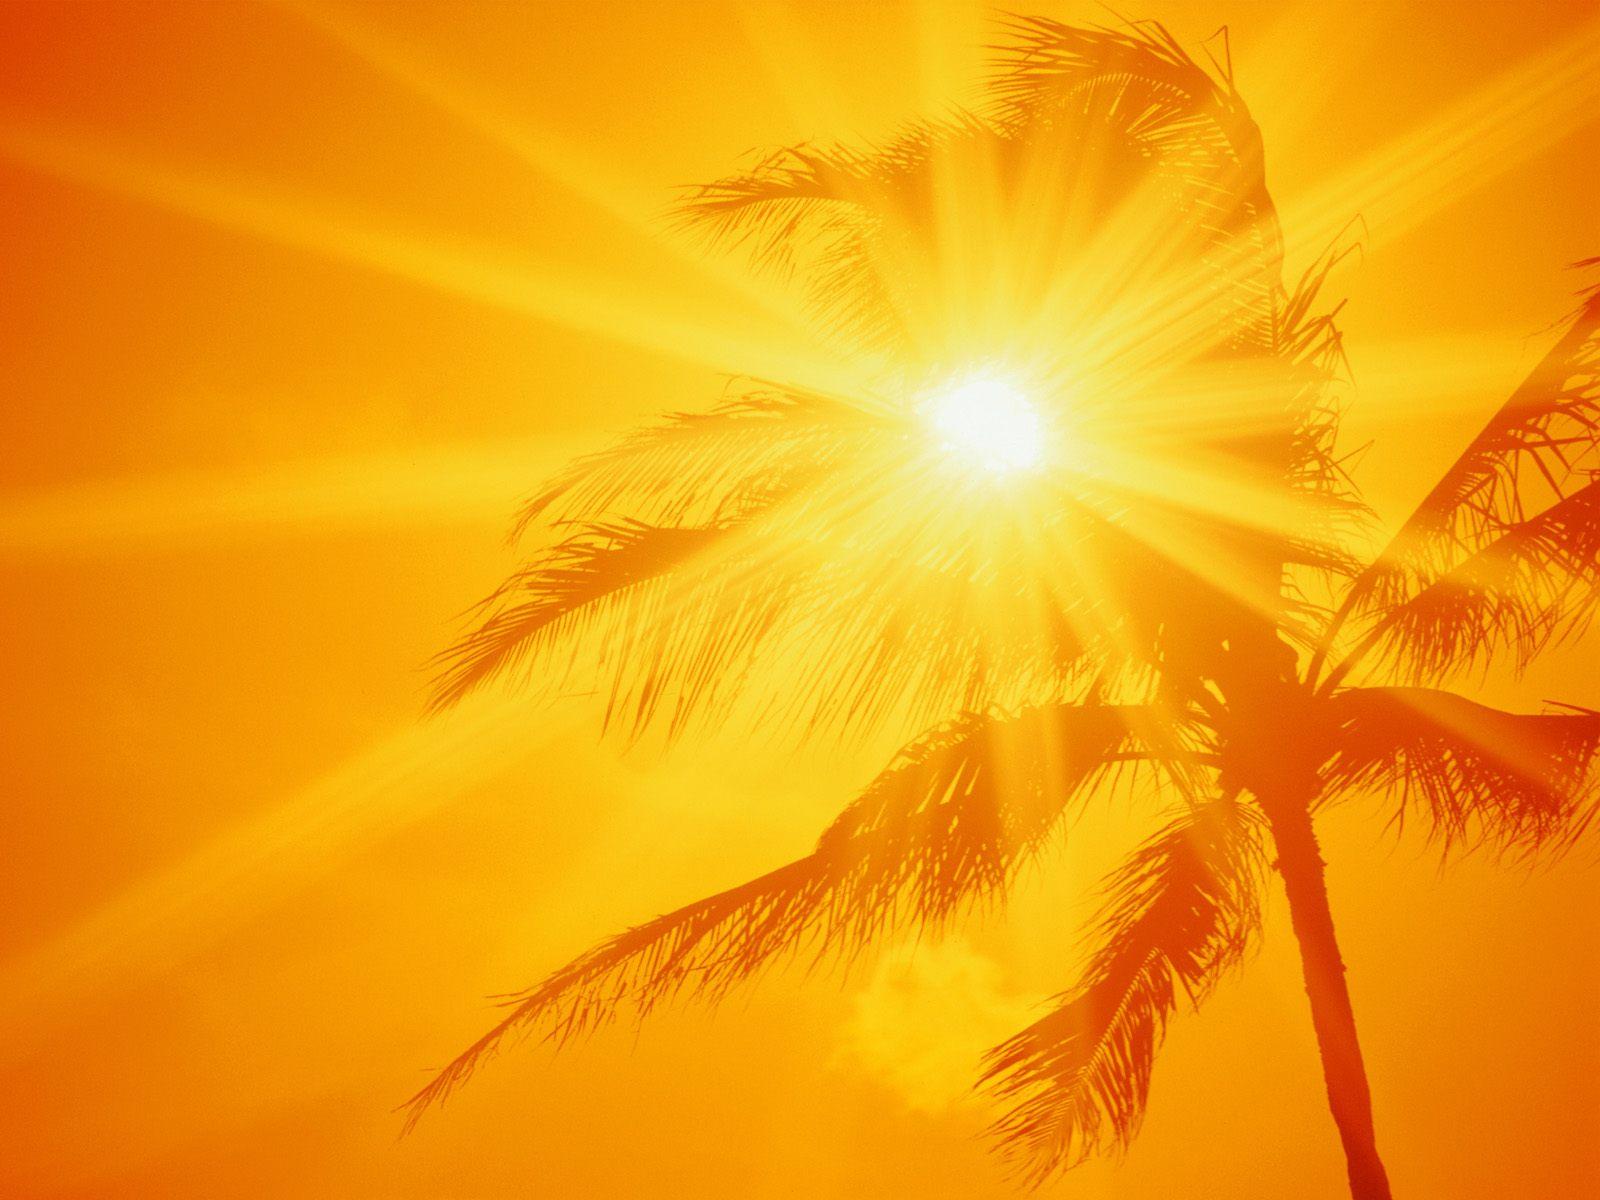 rays of sunshine showing through a palm tree and creating orange ambient light